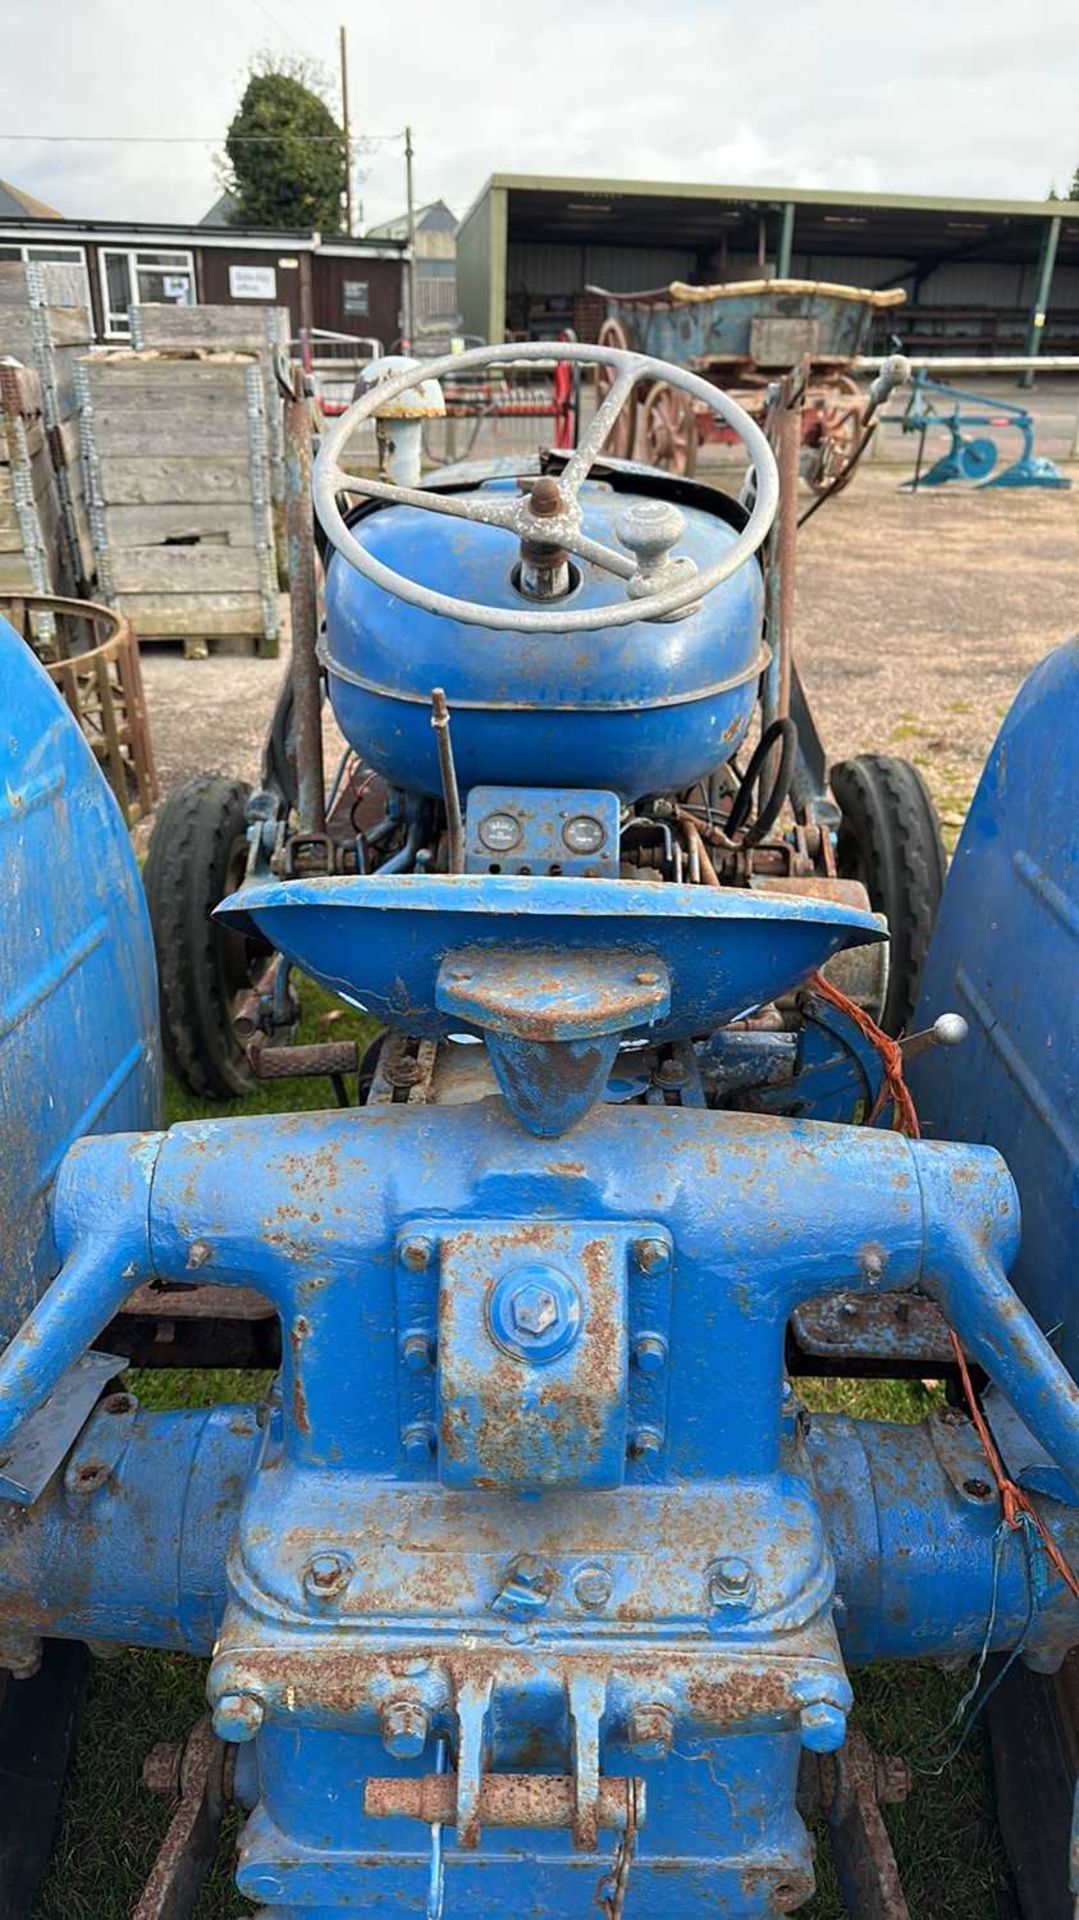 A Fordson Tractor with front loader arms, requiring full restoration - Bild 14 aus 14